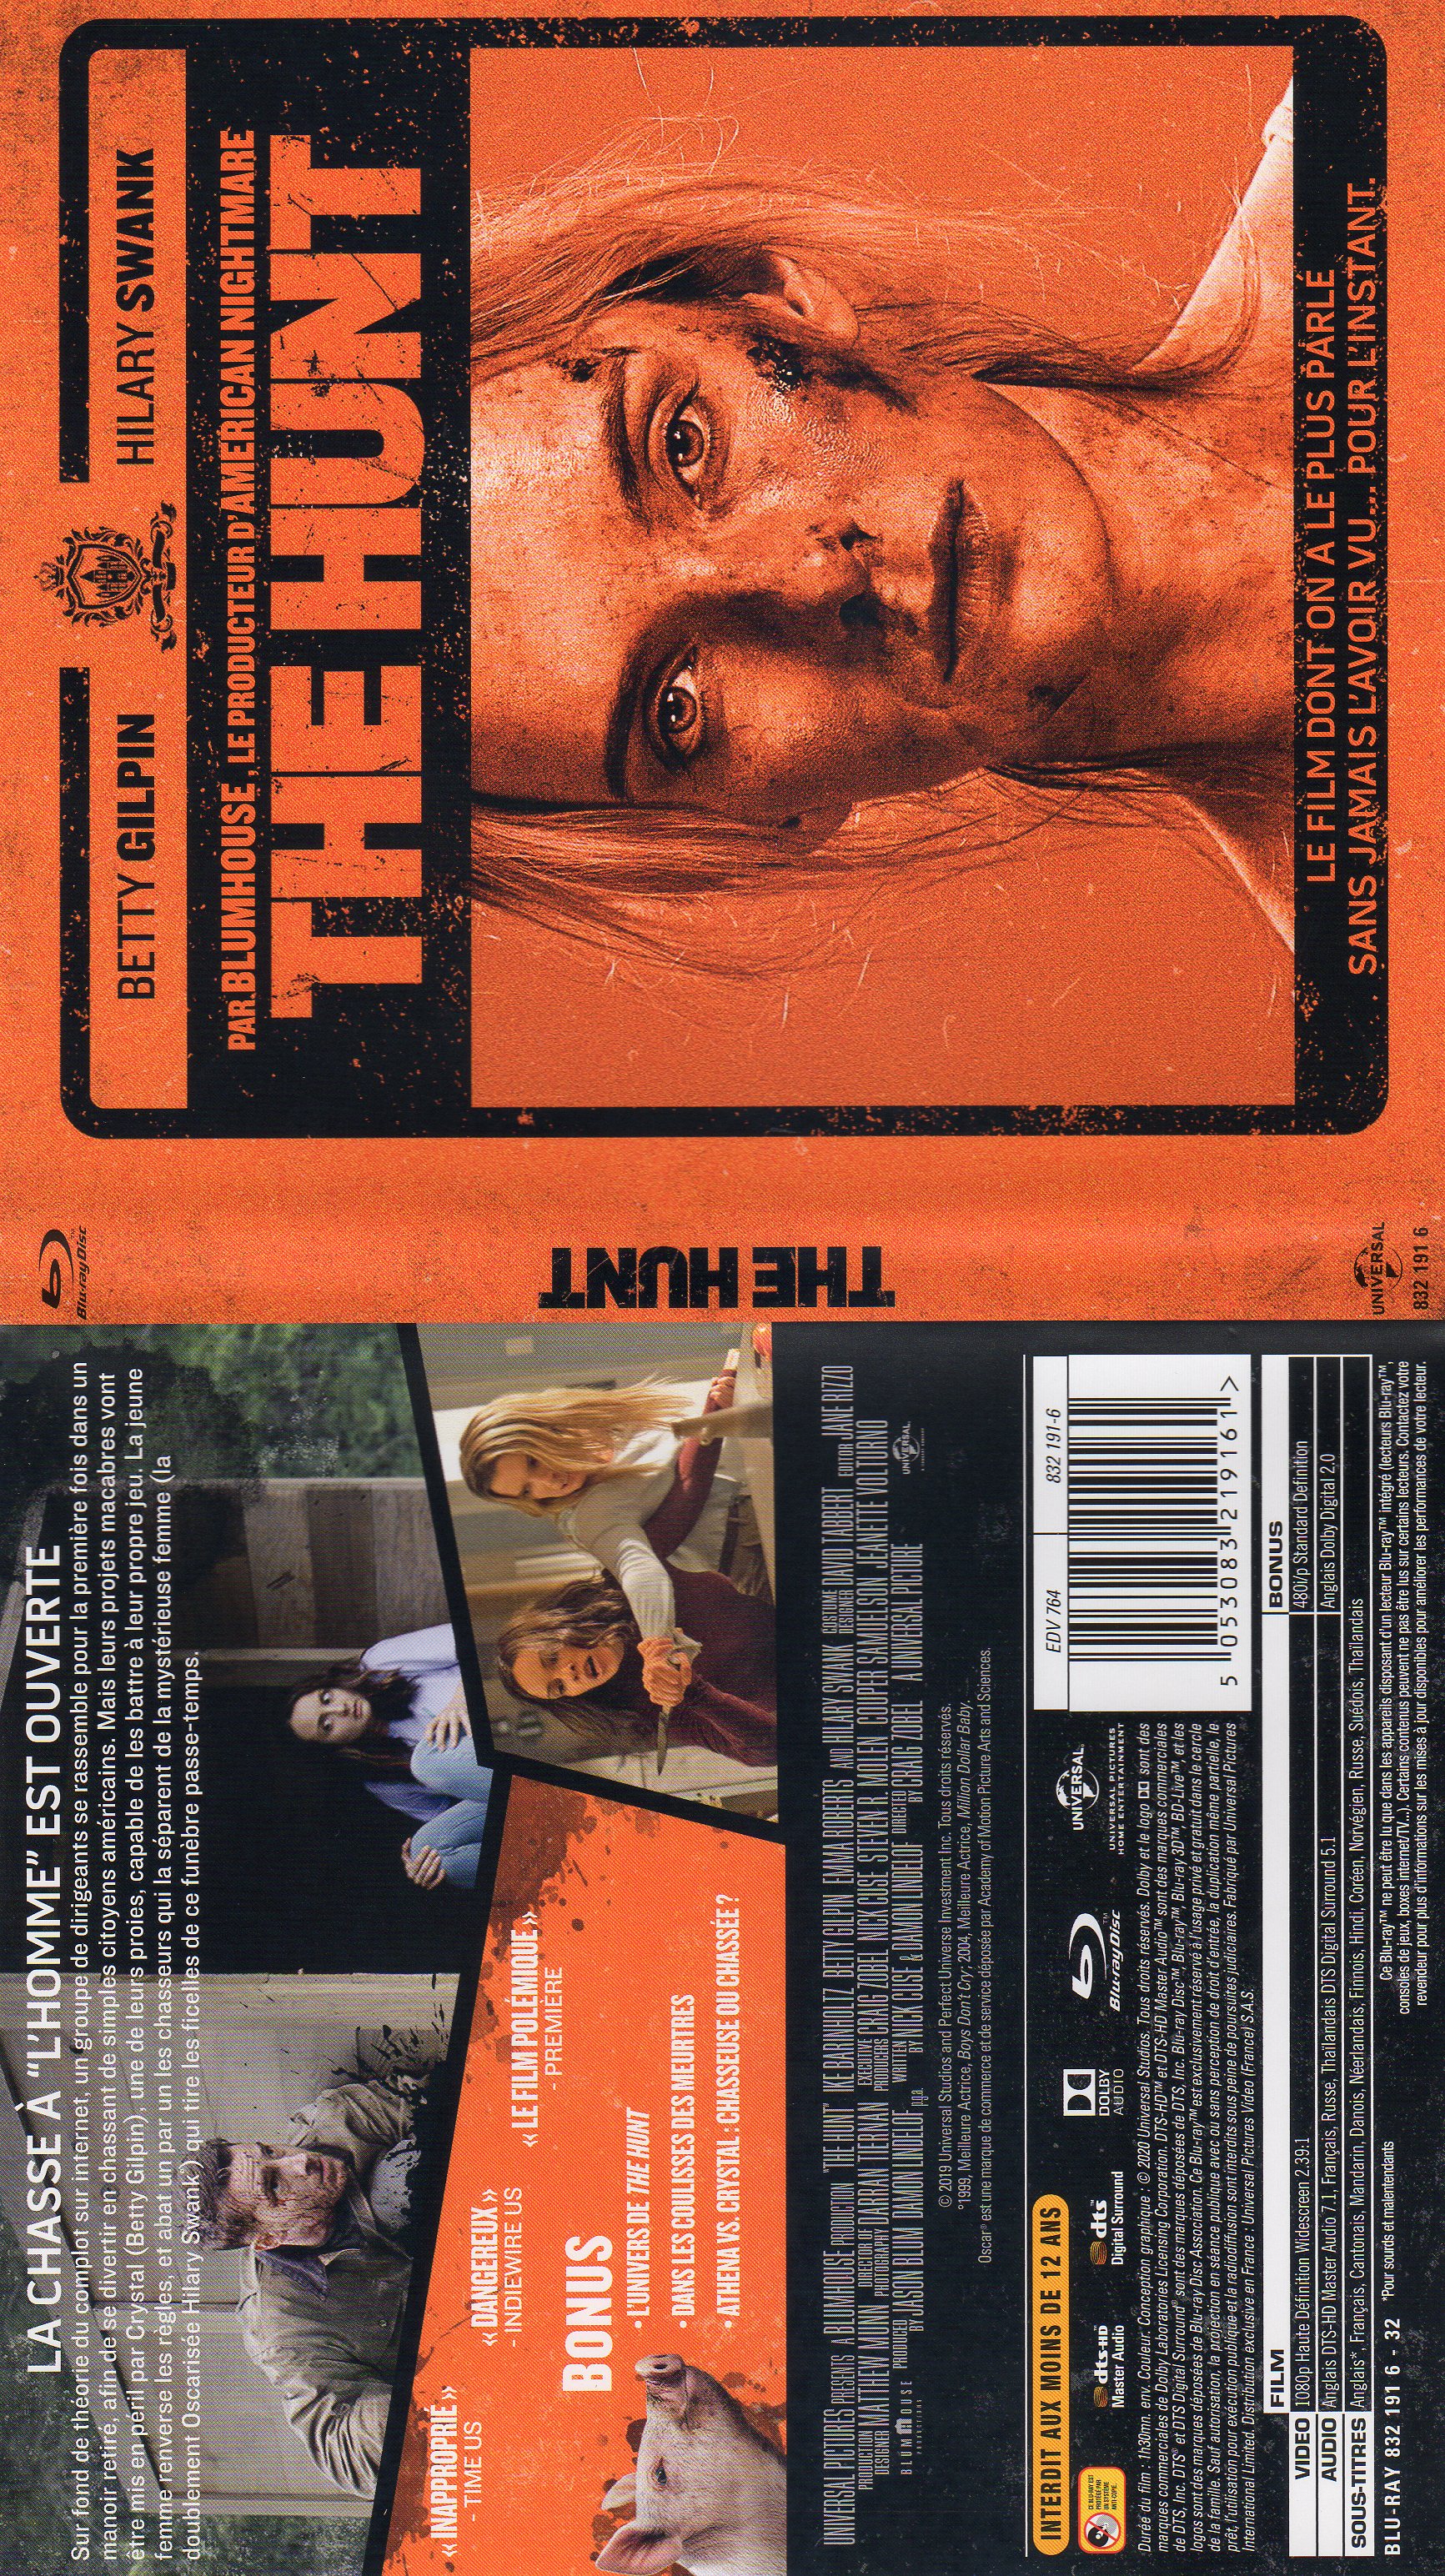 Jaquette DVD The hunt (BLU-RAY)